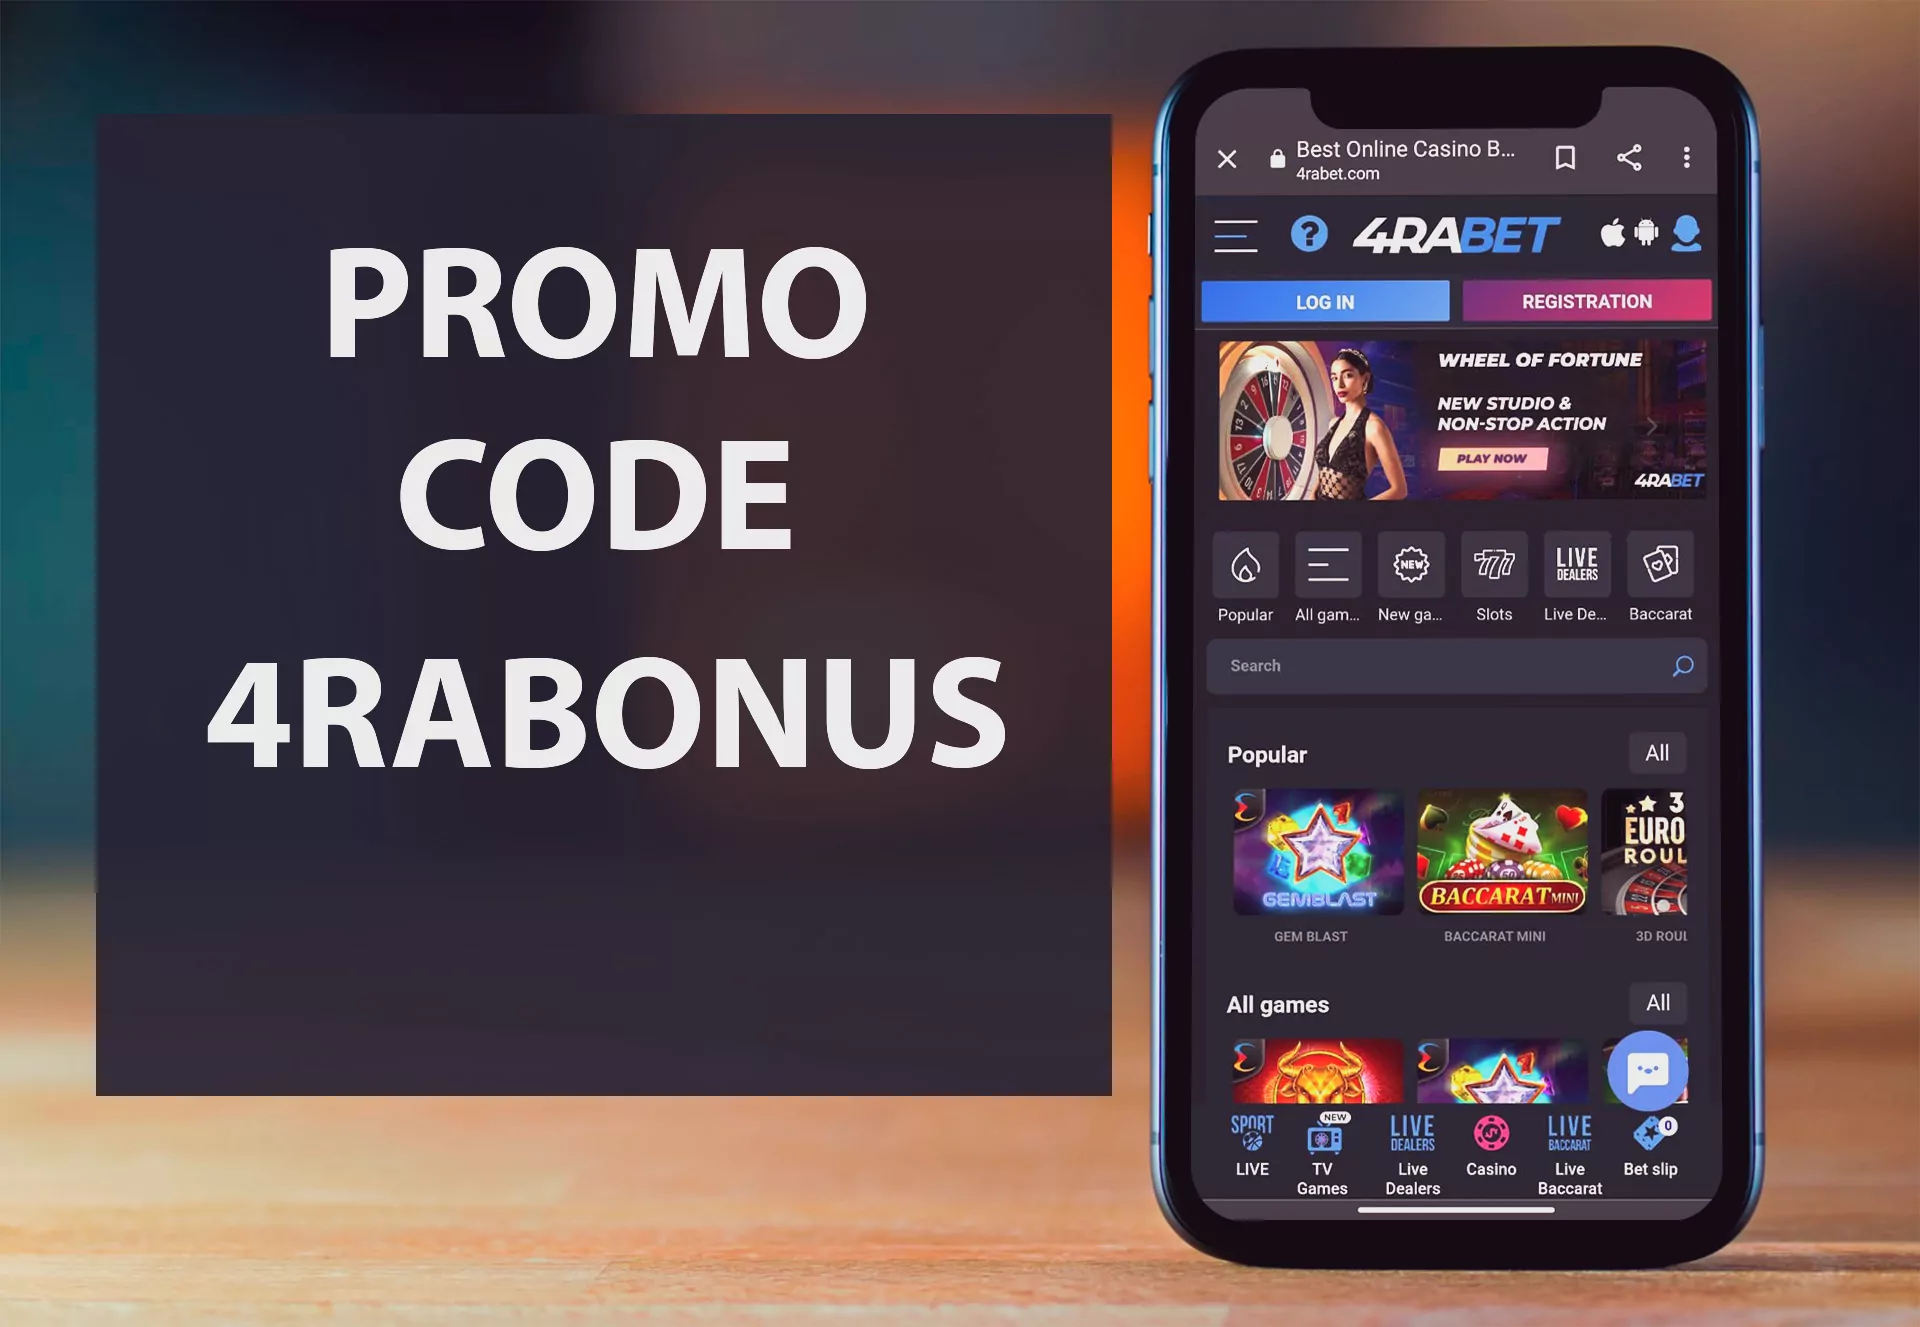 You can spend your bonus money on different casino games at 4rabet.